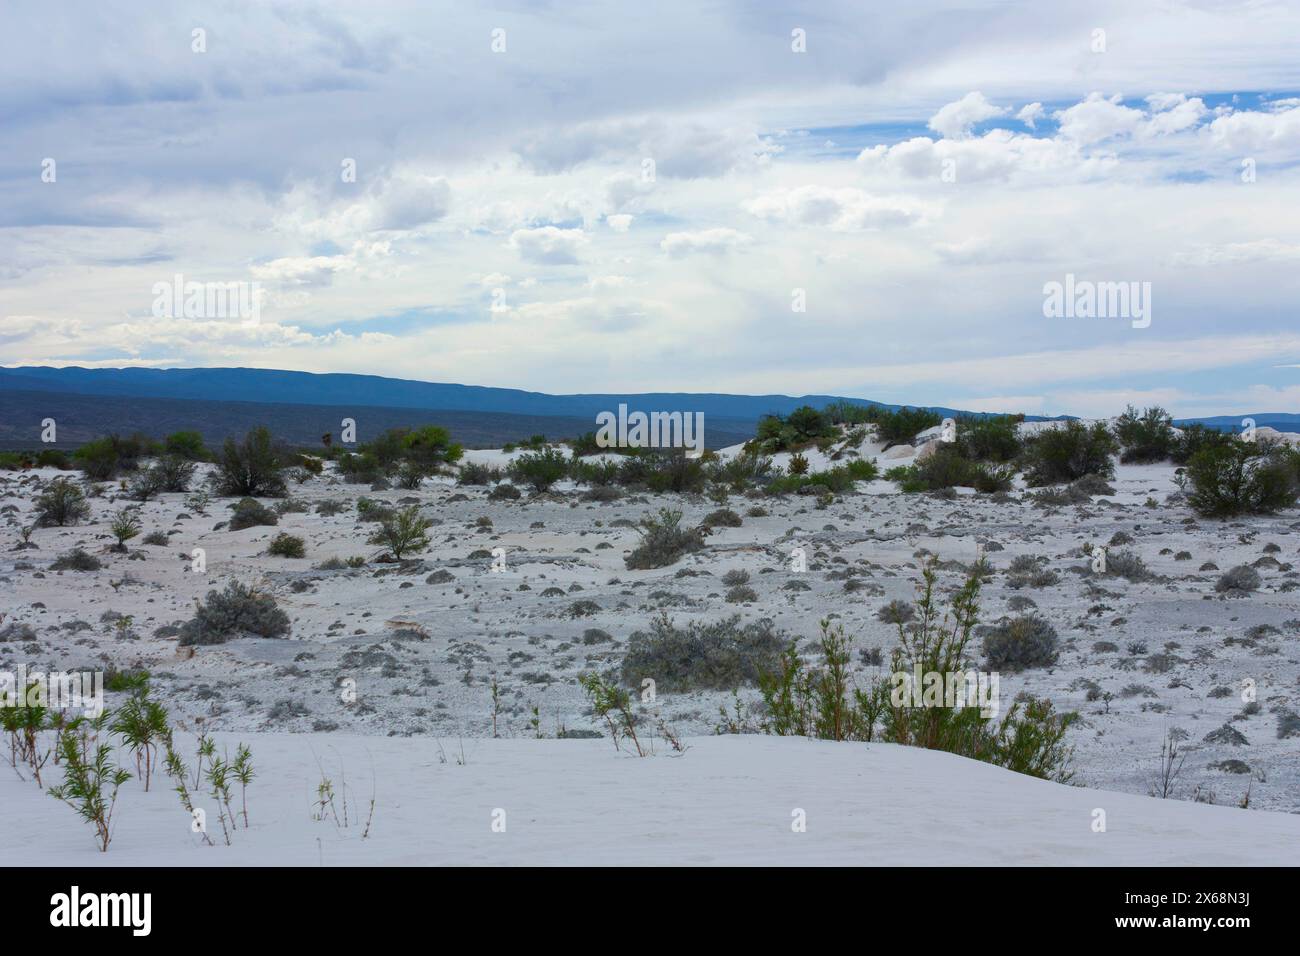 The hard-to-find white desert in the world located in Coahuila Mexico also known as Yeso dunes Stock Photo